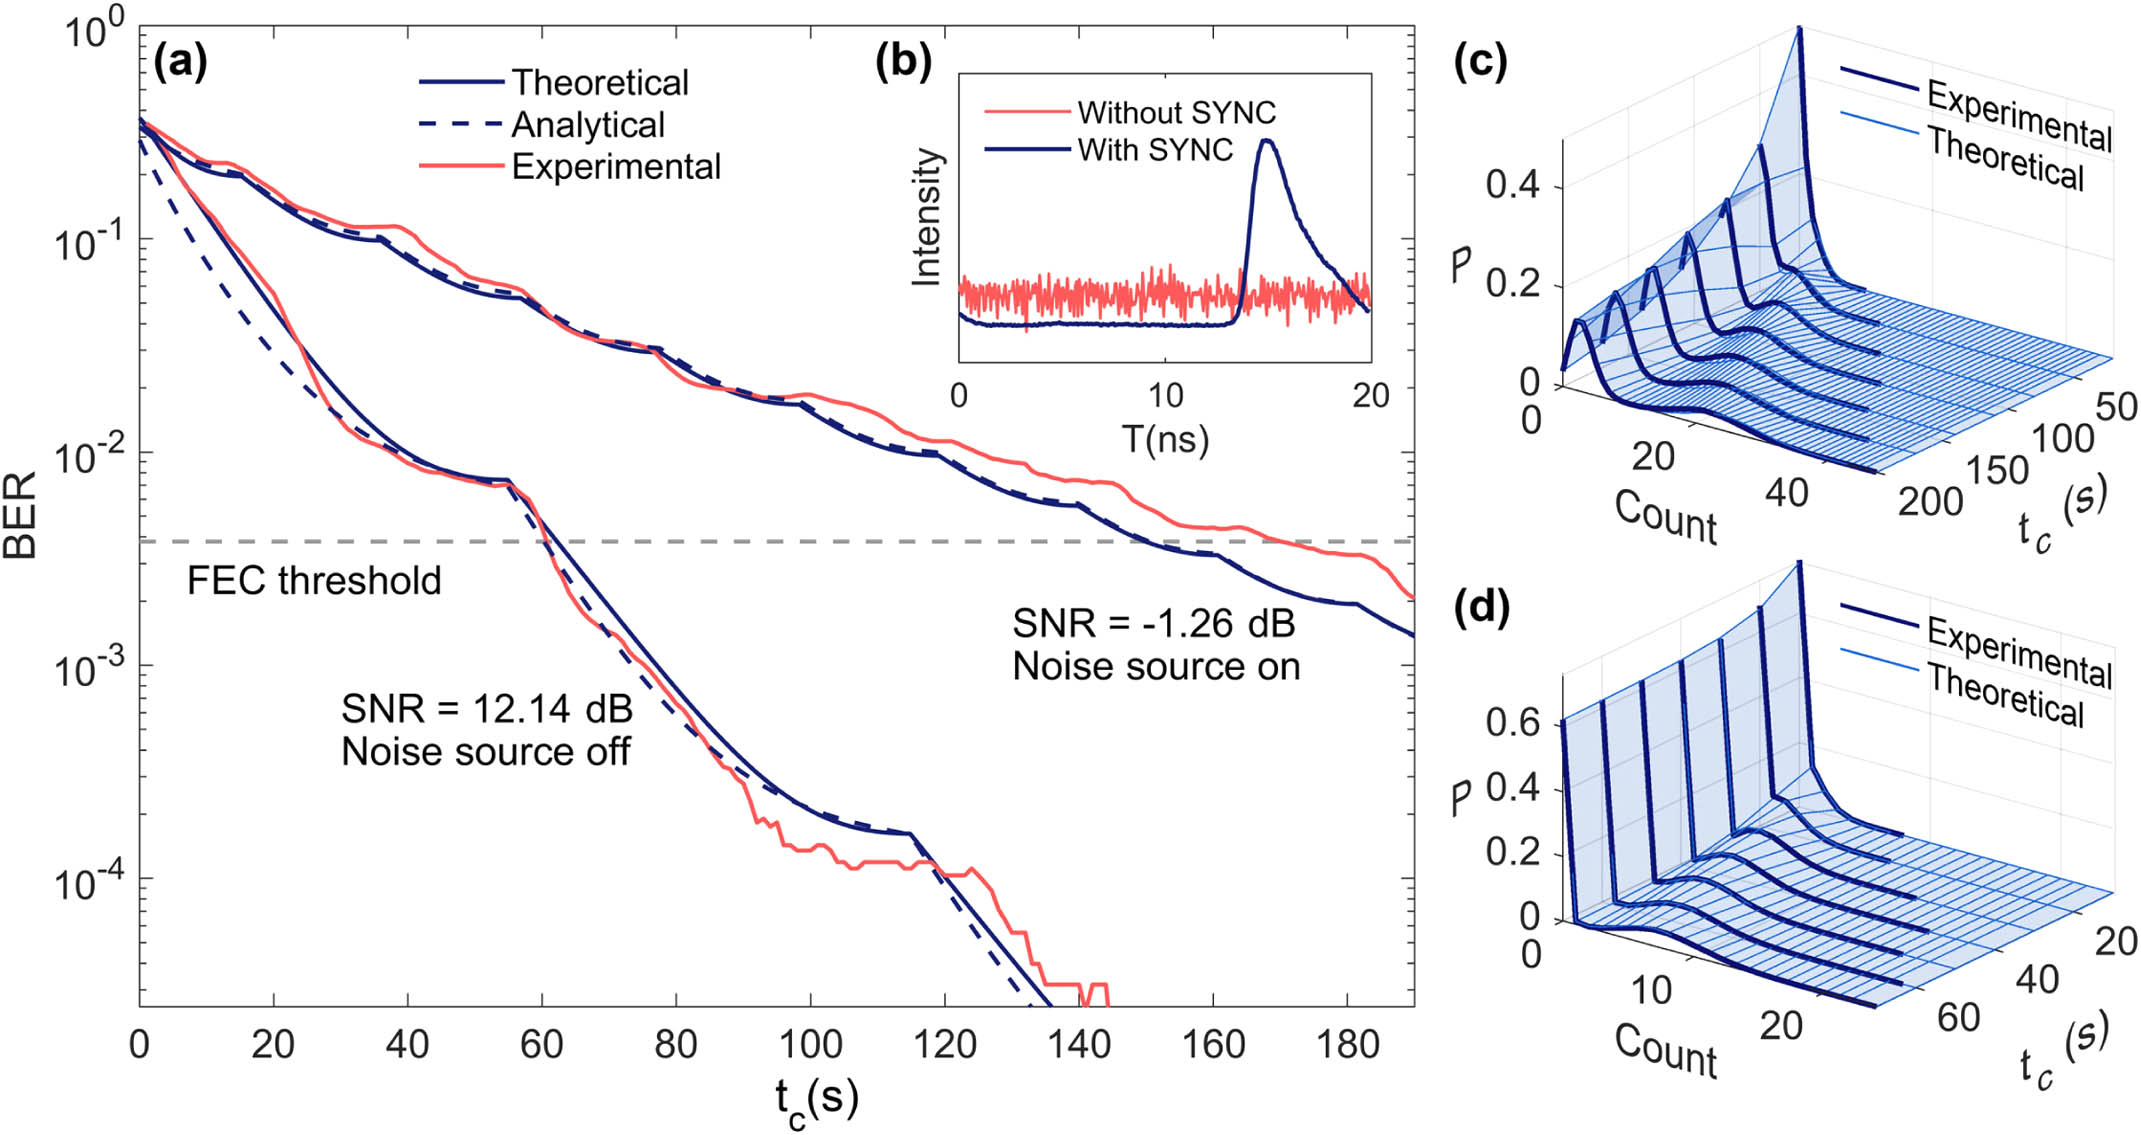 Establishing reliable underwater optical communication links using time-evolving photon statistics. (a) Time evolution of the BER with different signal-to-noise ratio (SNR) conditions. We show the theoretical, analytical, and experimental results of 100-m-long underwater optical communication. (b) The retrieved waveform with and without the PICOC synchronization scheme. We show the experimental results of 100-m-long underwater transmission distance and −1.26 dB SNR. (c) Time evolution of photon statistics with 100-m-long underwater transmission distance and −1.26 dB SNR. The light blue surface represents the expected photon statistics, and dark blue curves show the experimental results. (d) Time evolution of photon statistics with 100-m-long underwater transmission distance and 12.14 dB SNR. FEC, forward error correction.